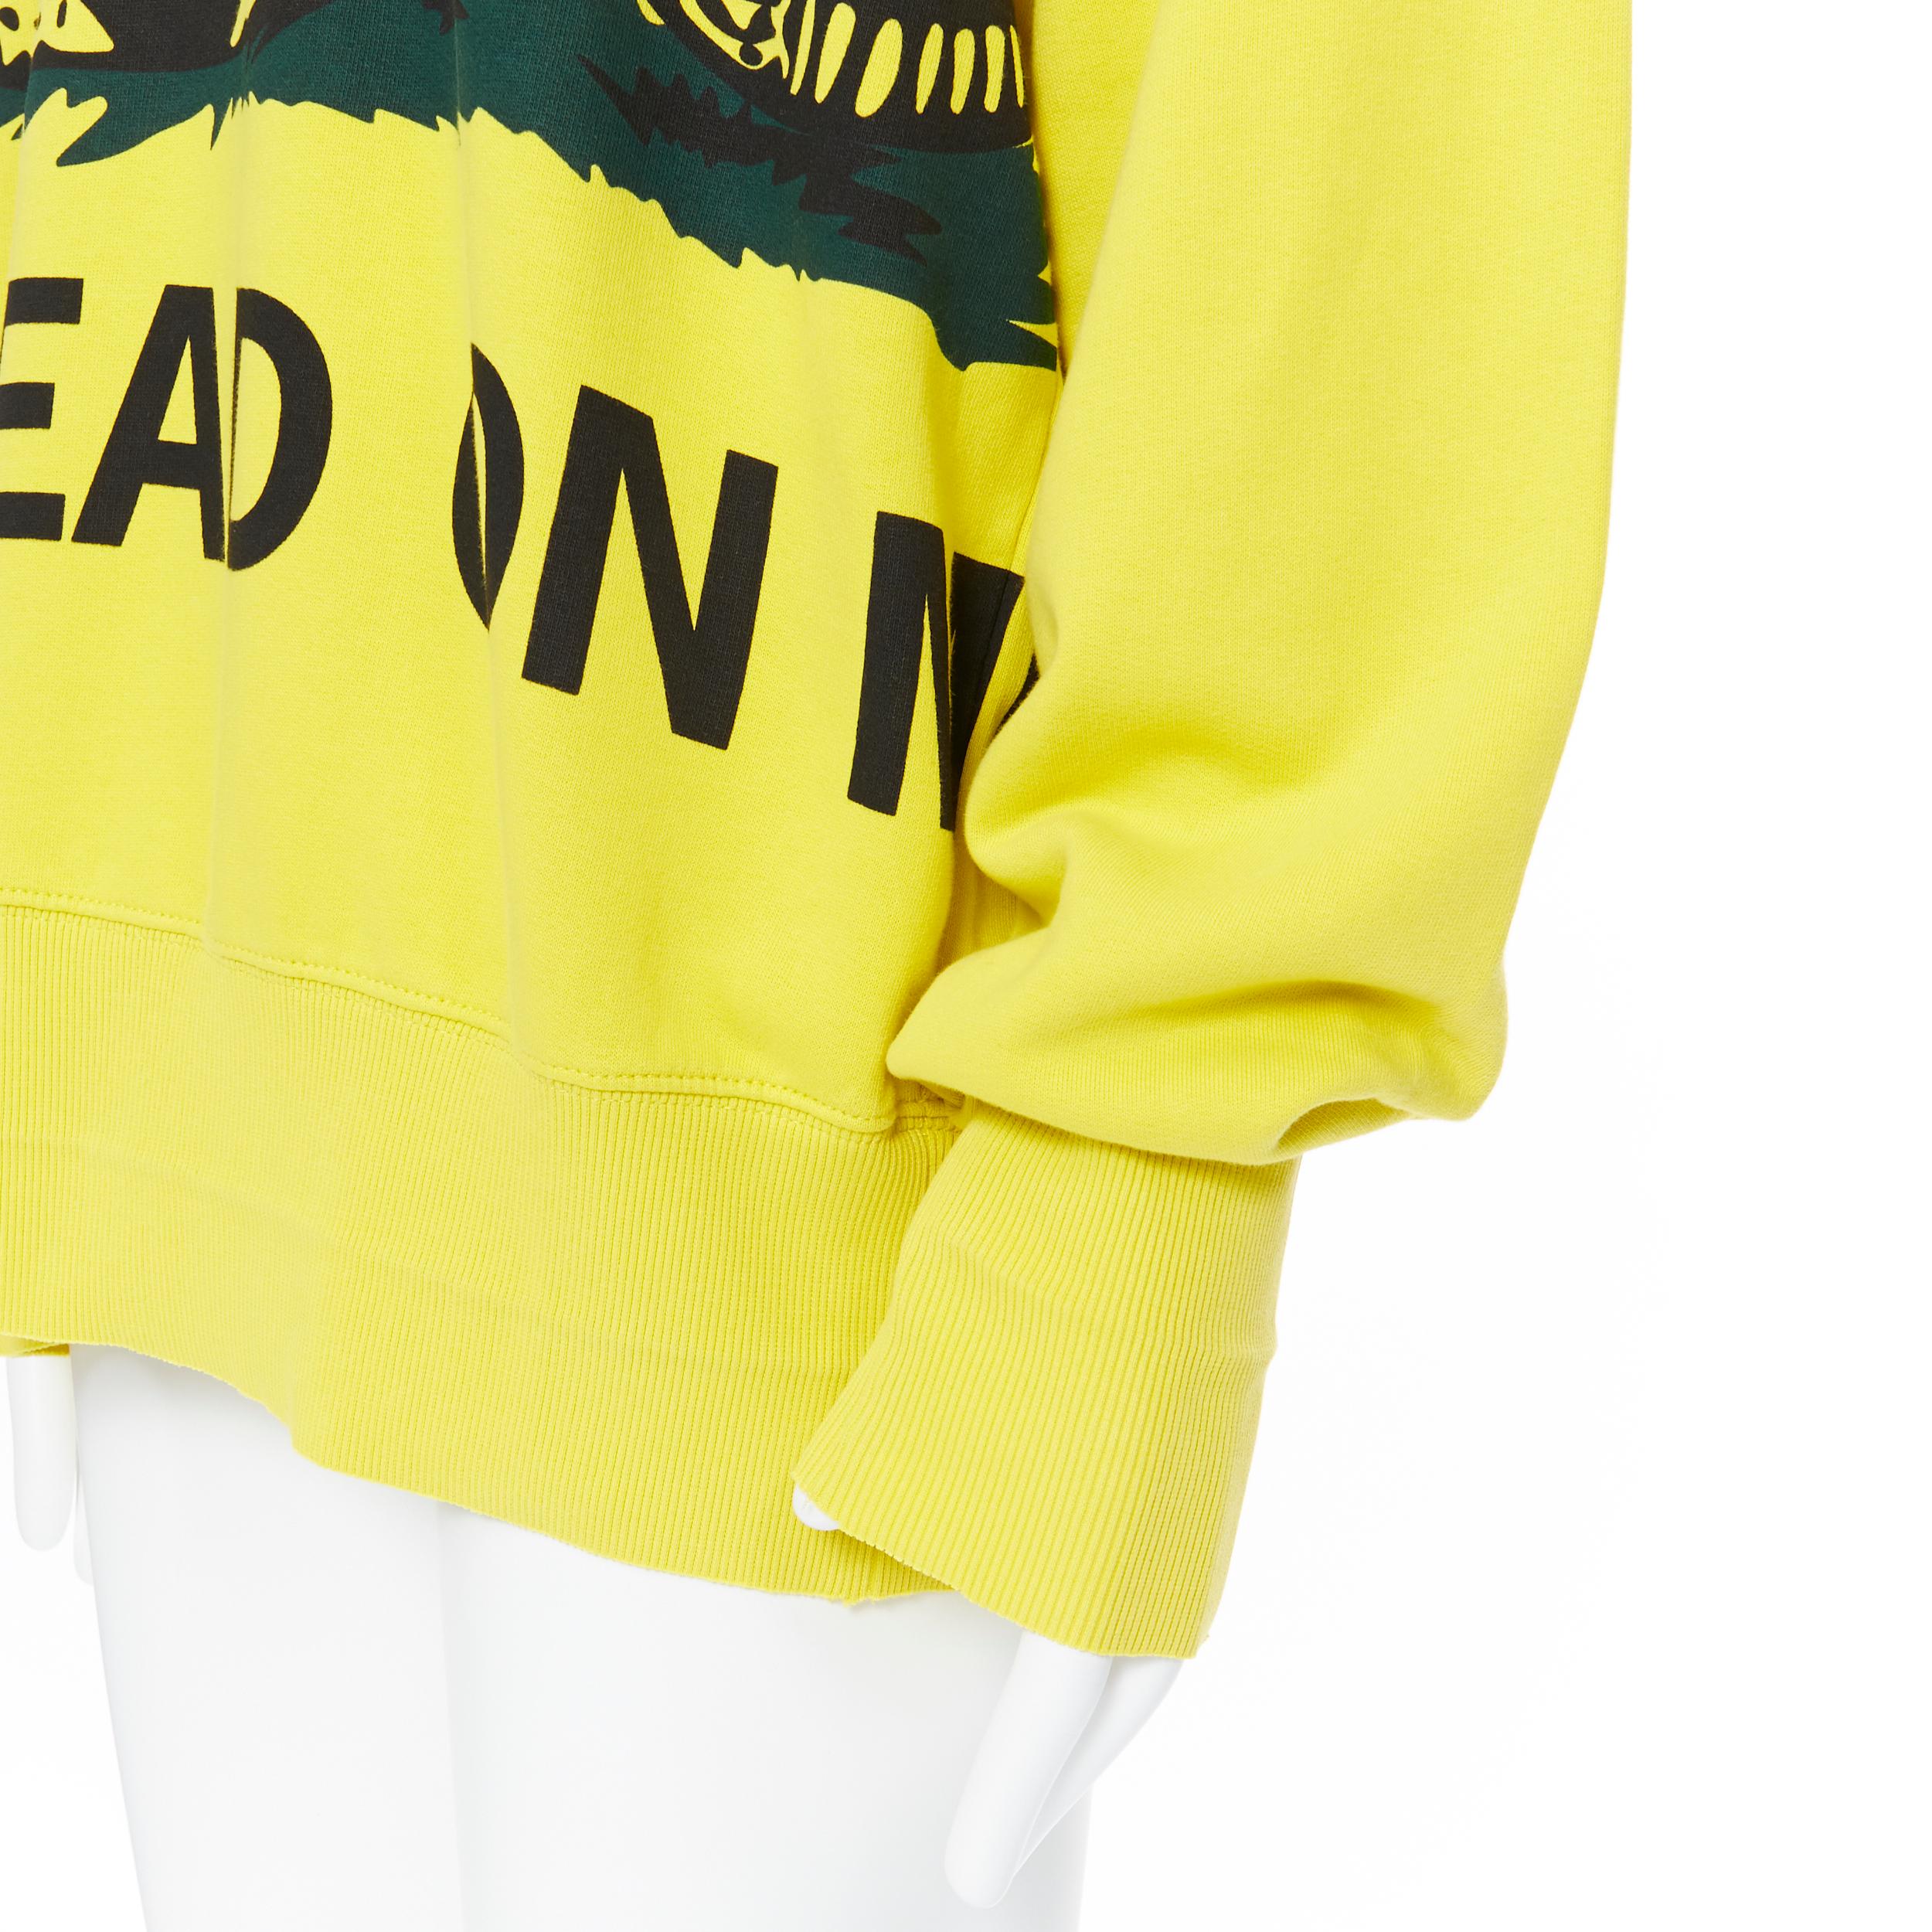 new VETEMENTS Demna Gvasalia Don’t Tread On Me Snake fleece oversized hoodie M
Brand: Vetements
Designer: Demna Gvasalia
Collection: AW2019
Model Name / Style: Snake hoodie
Material: Cotton
Color: Yellow
Pattern: Abstract; Snake print
Extra Detail: